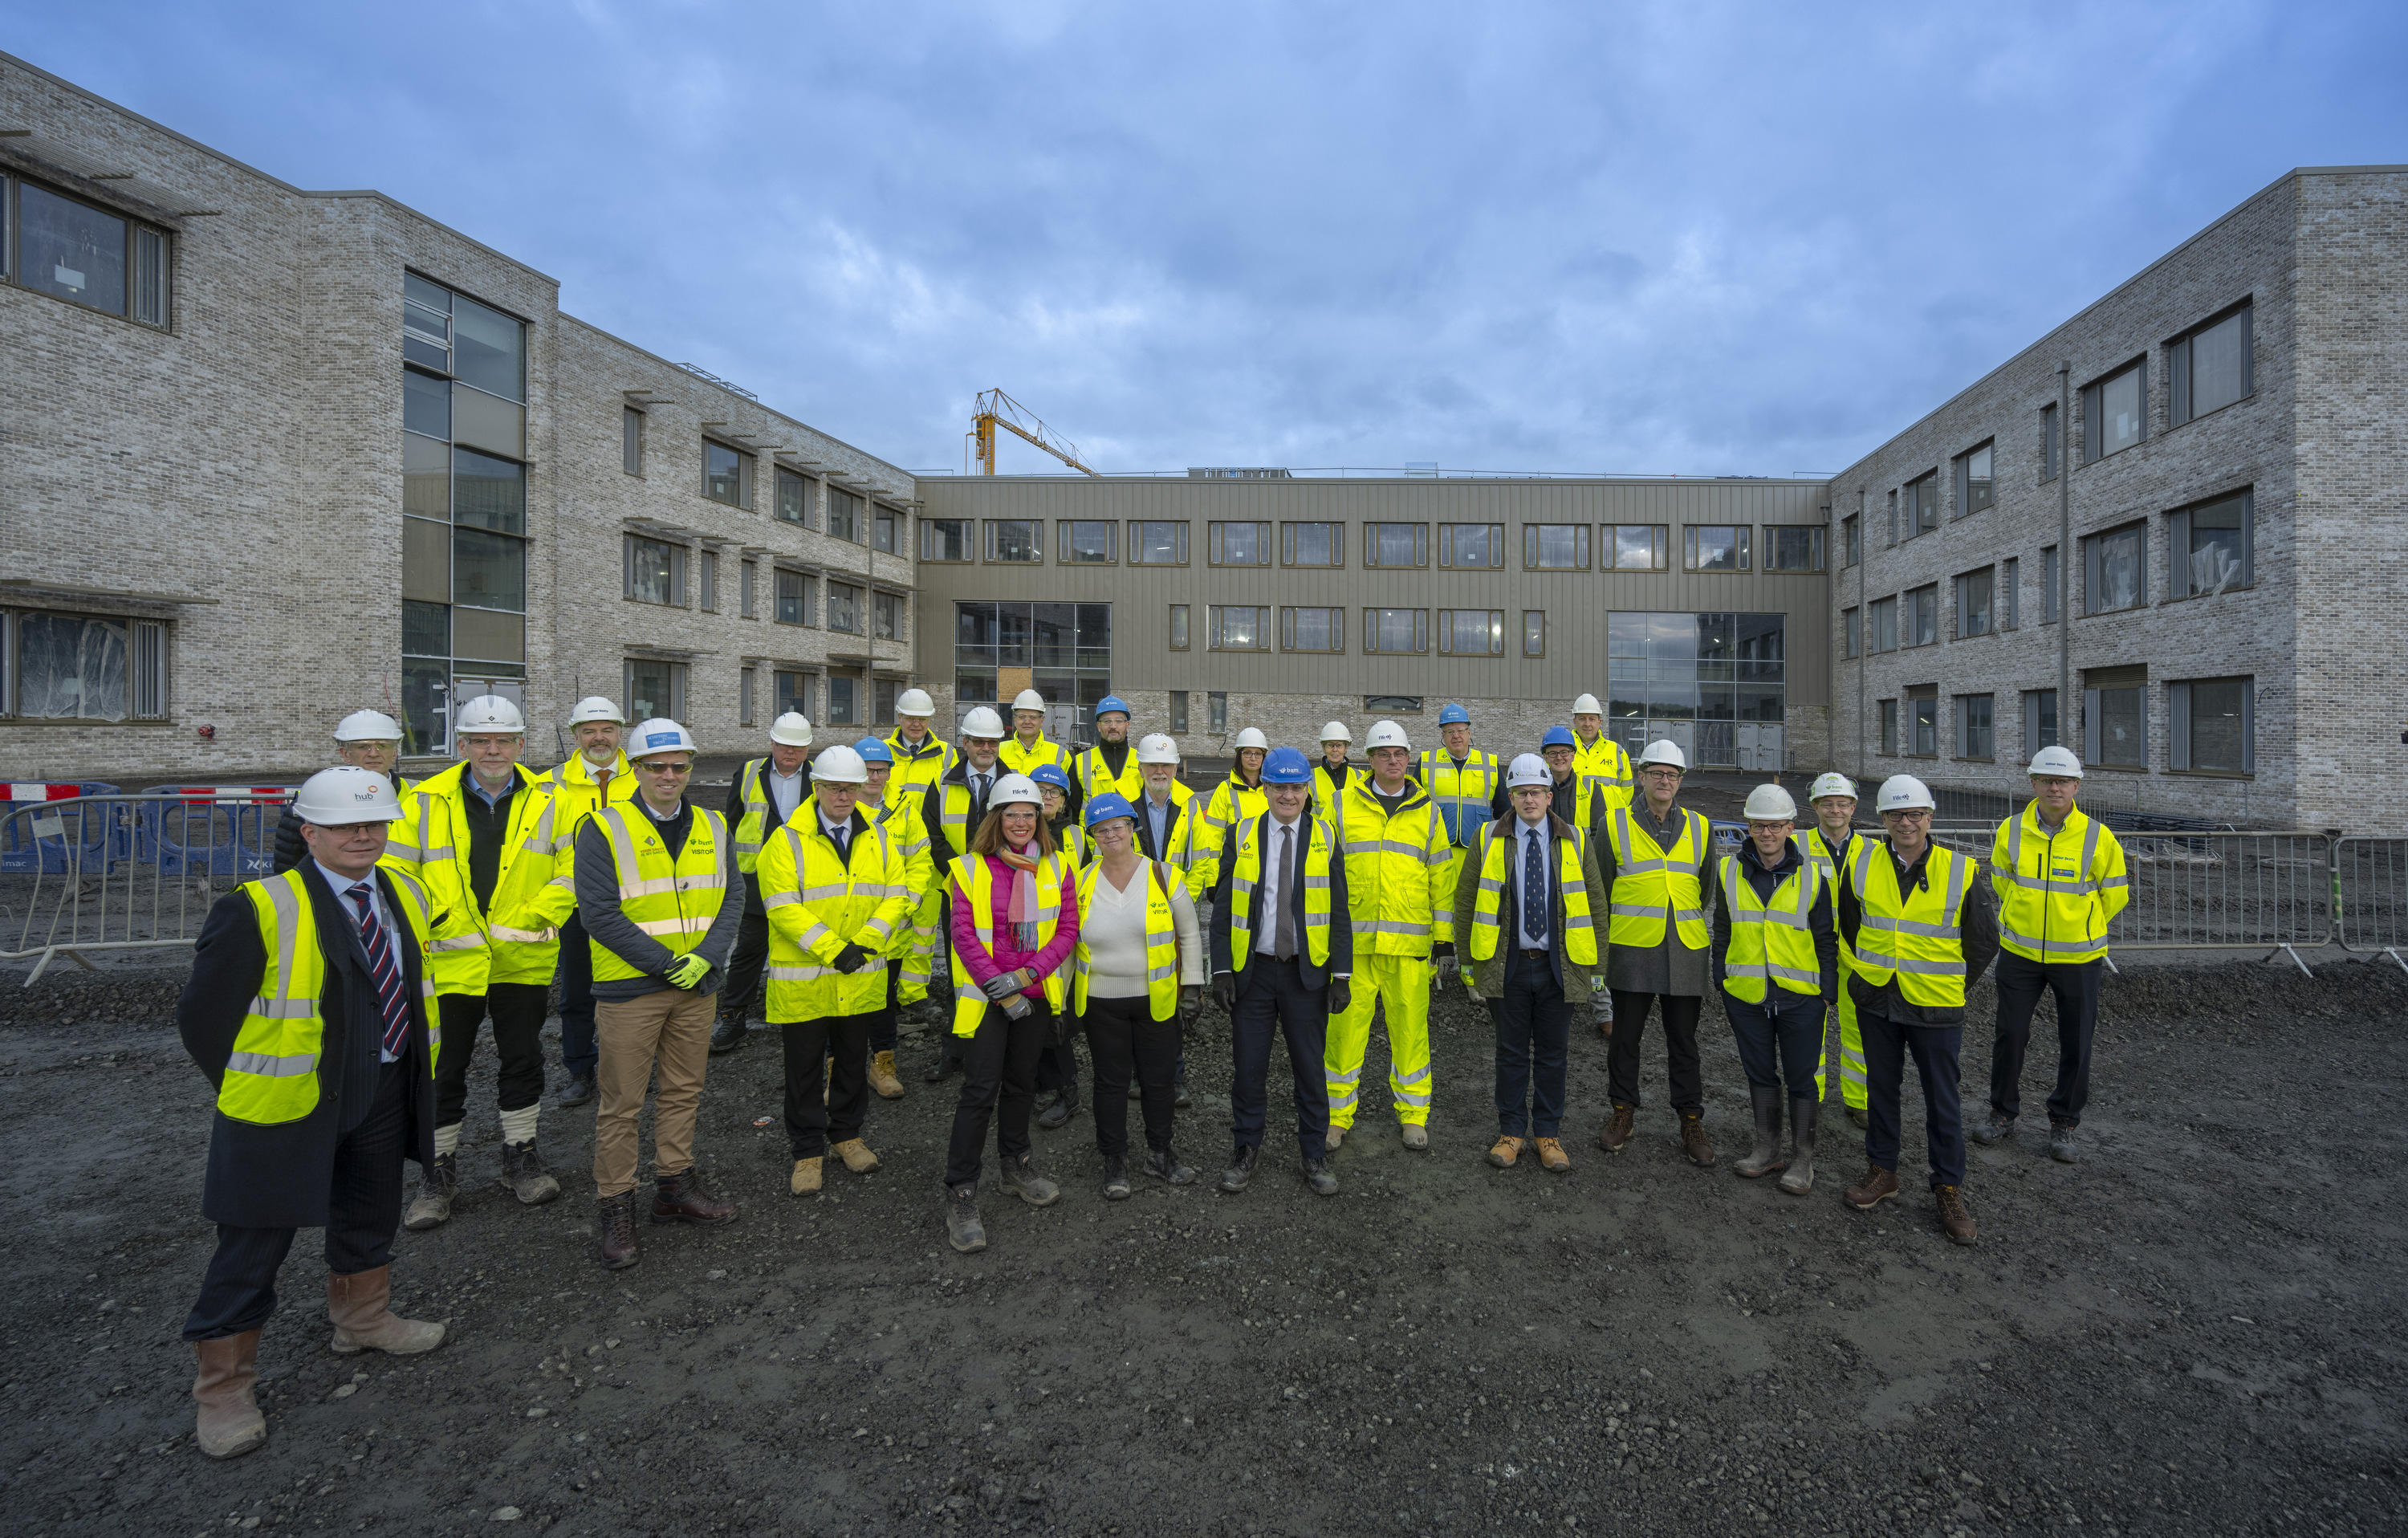 Minister sees quality approach at £250m Dunfermline Learning Campus